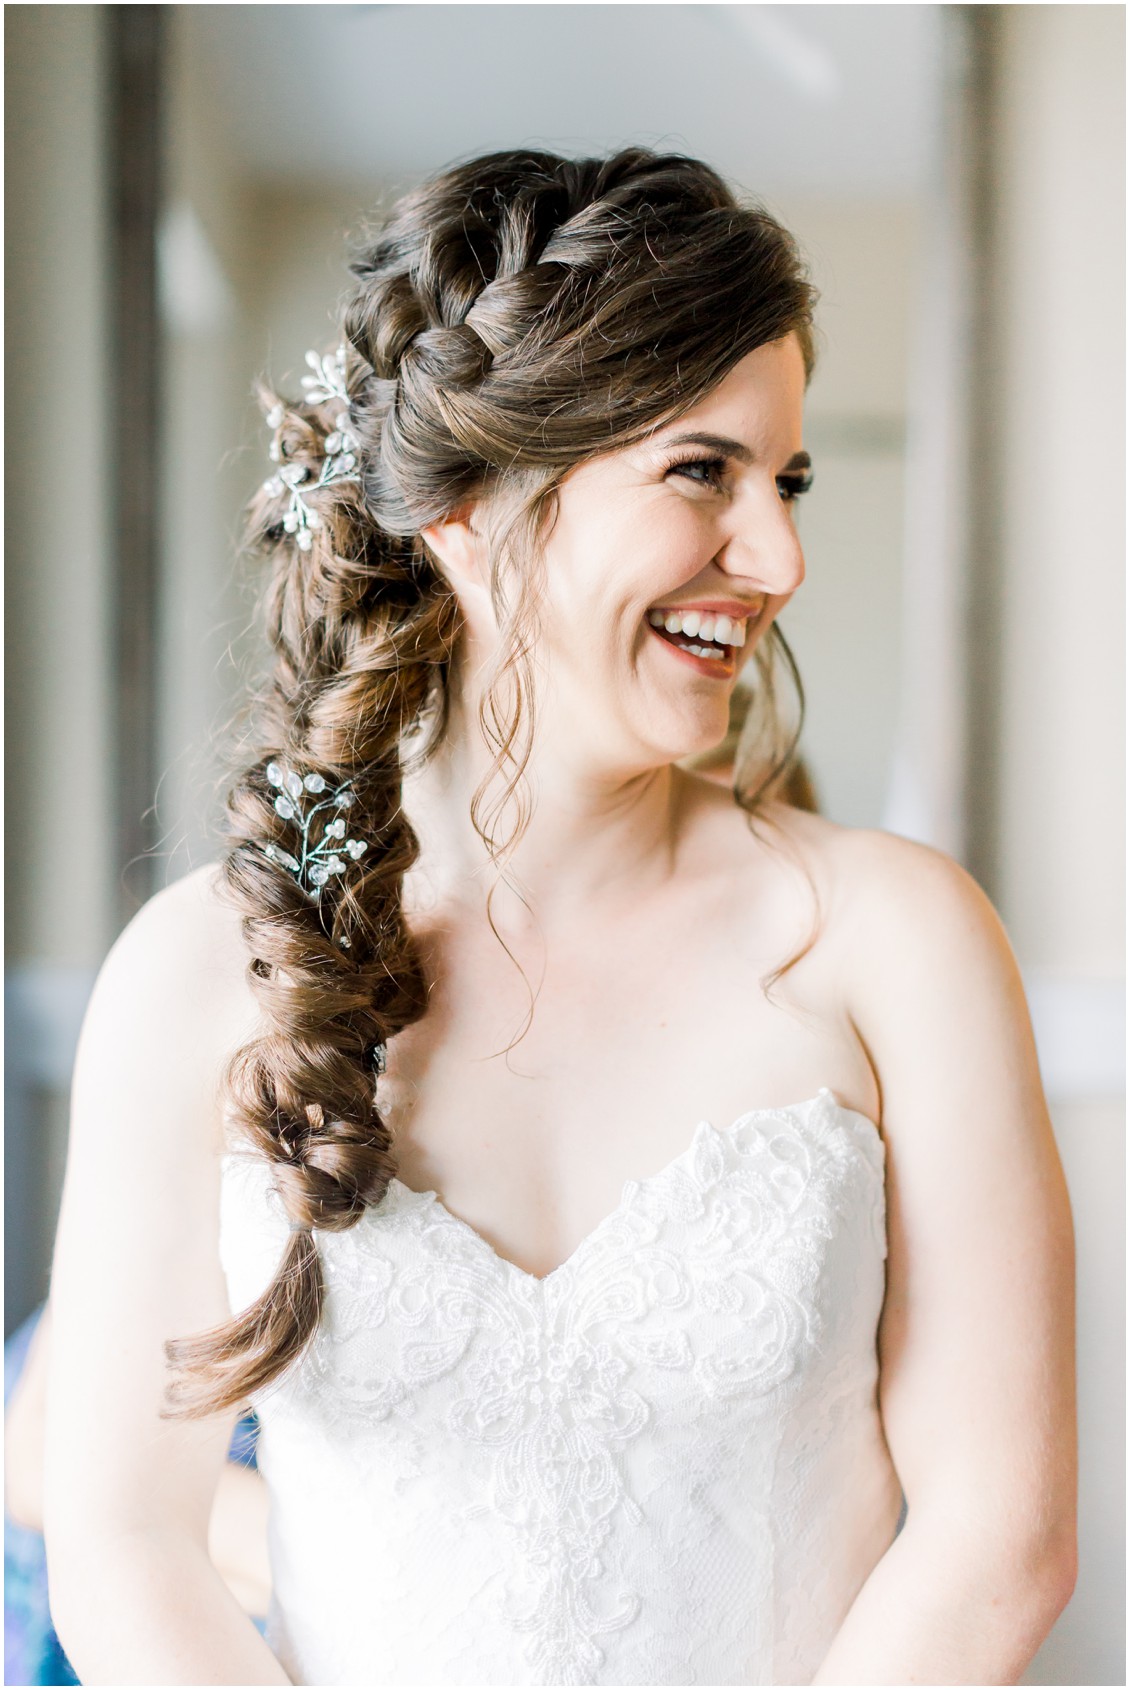 Bride with side braid and strapless wedding gown. | My Eastern Shore Wedding | 